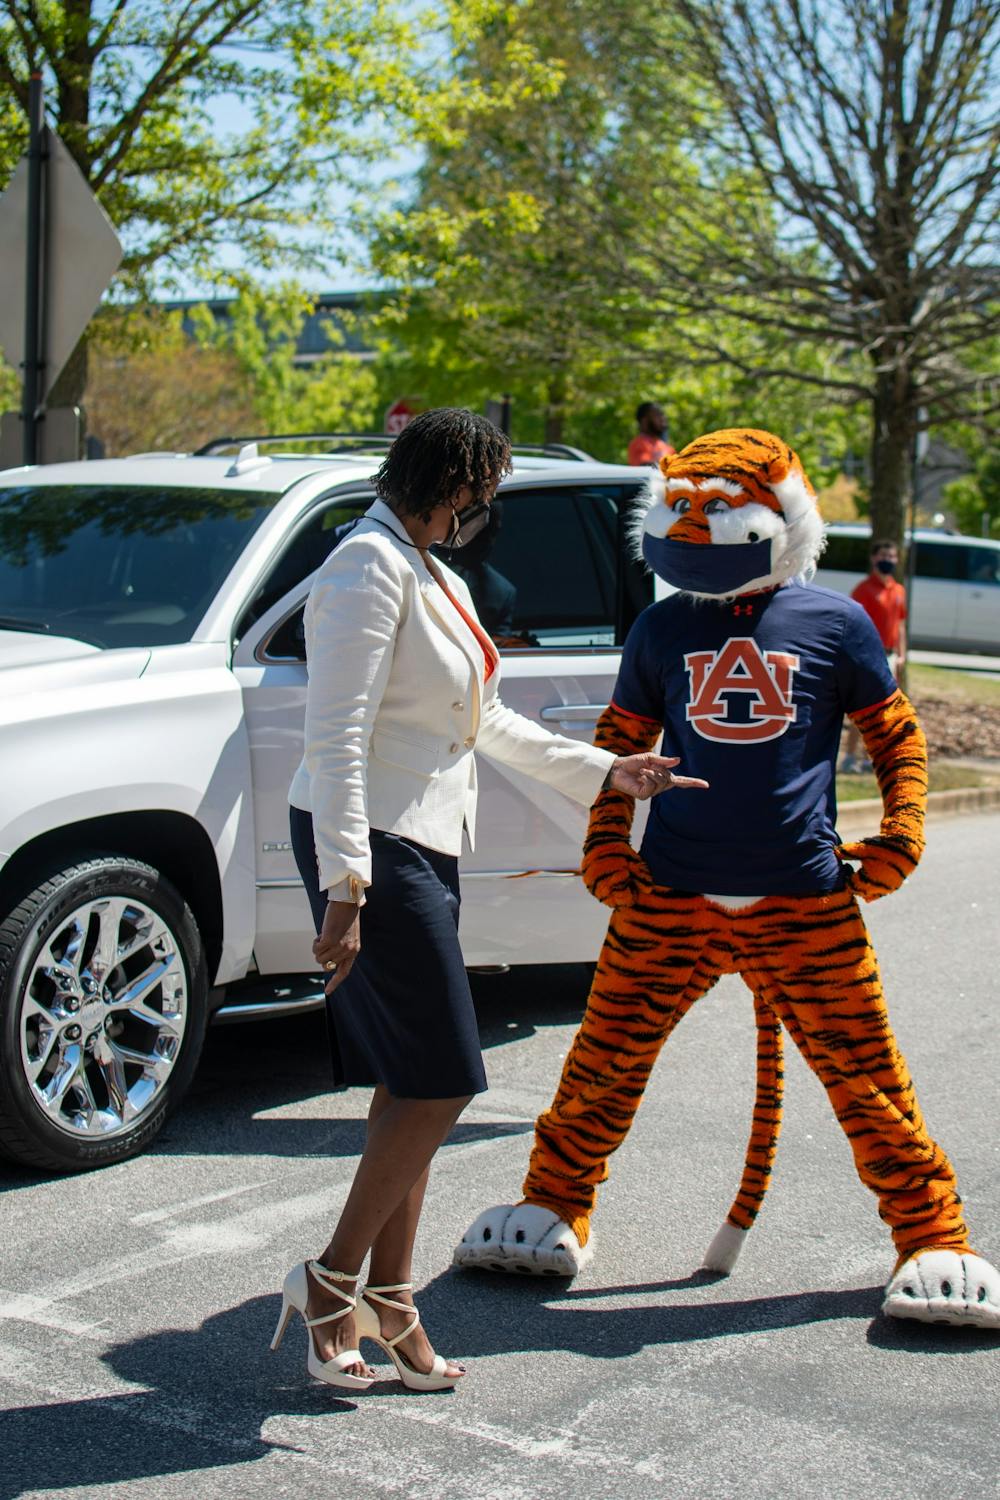 Johnnie Harris the new Auburn Women's Basketball coach talks with Aubie prior to her formal introduction ceremony on Monday, April 5, 2021, in Auburn, Ala. 